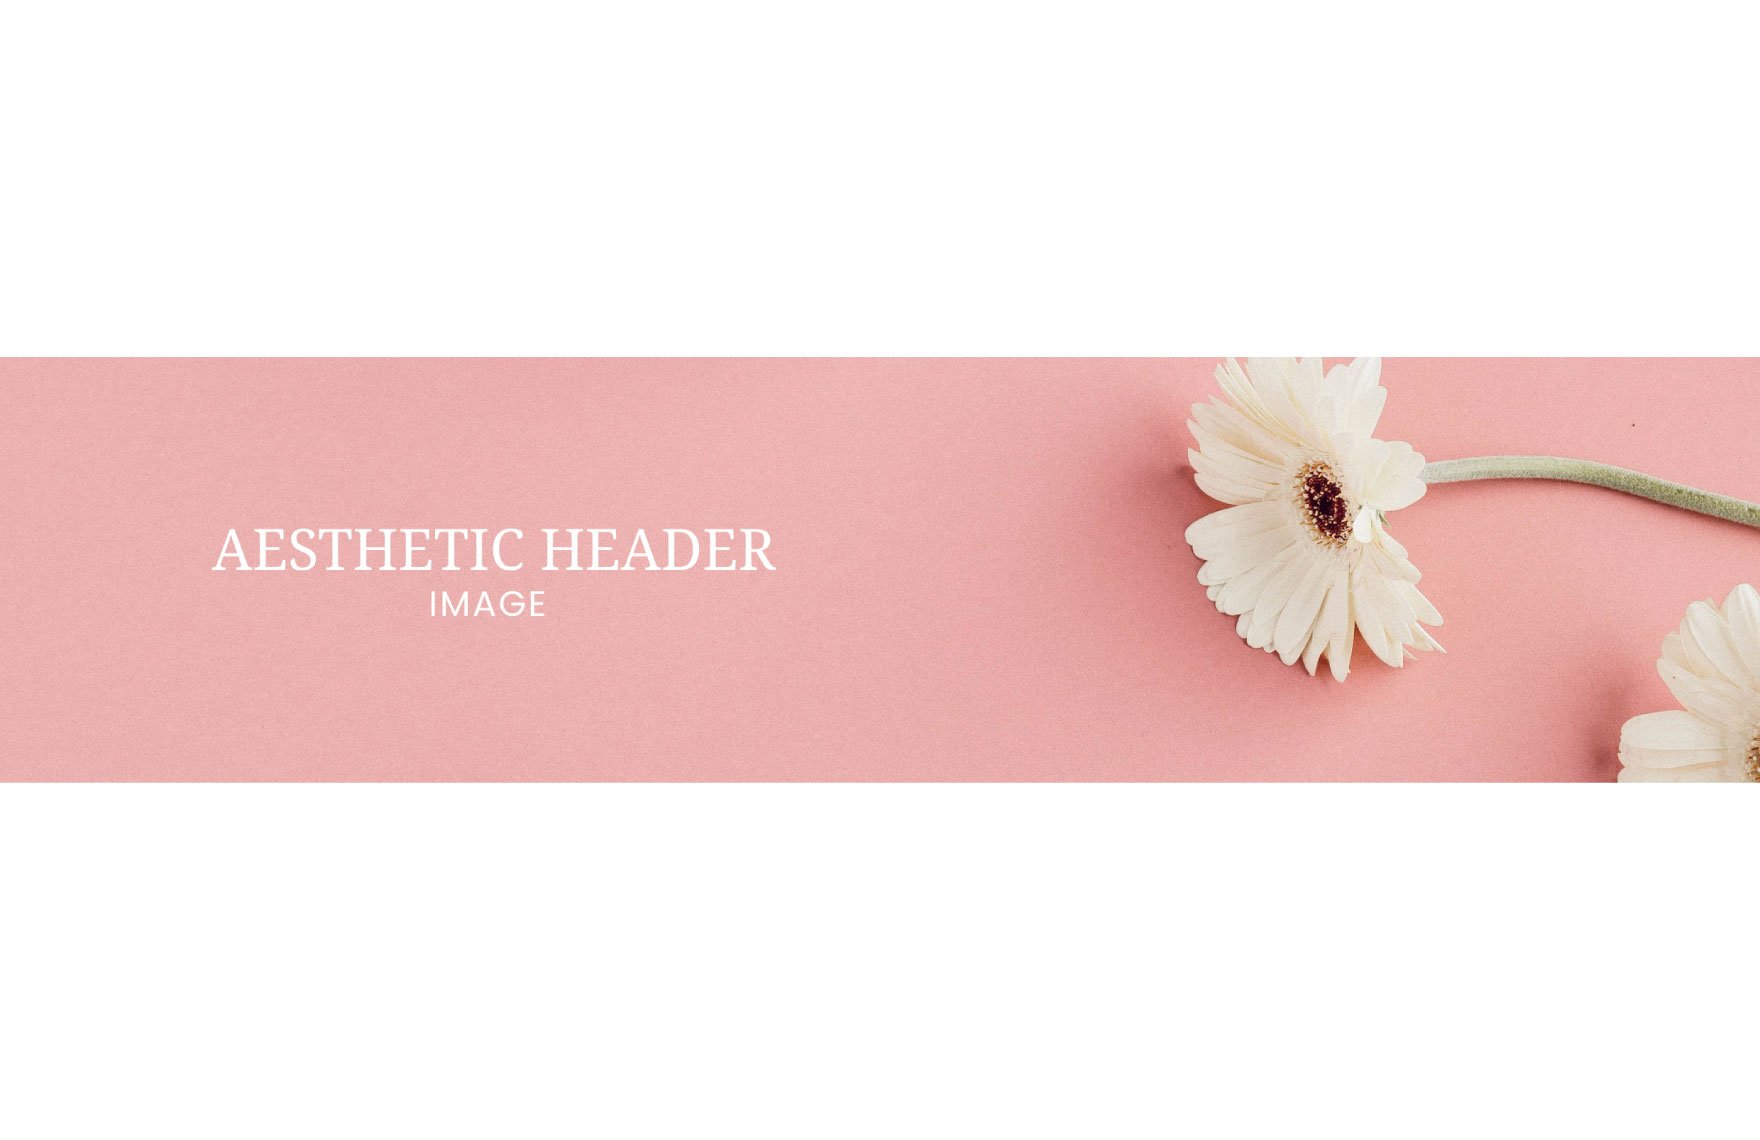 Aesthetic Header Image Template